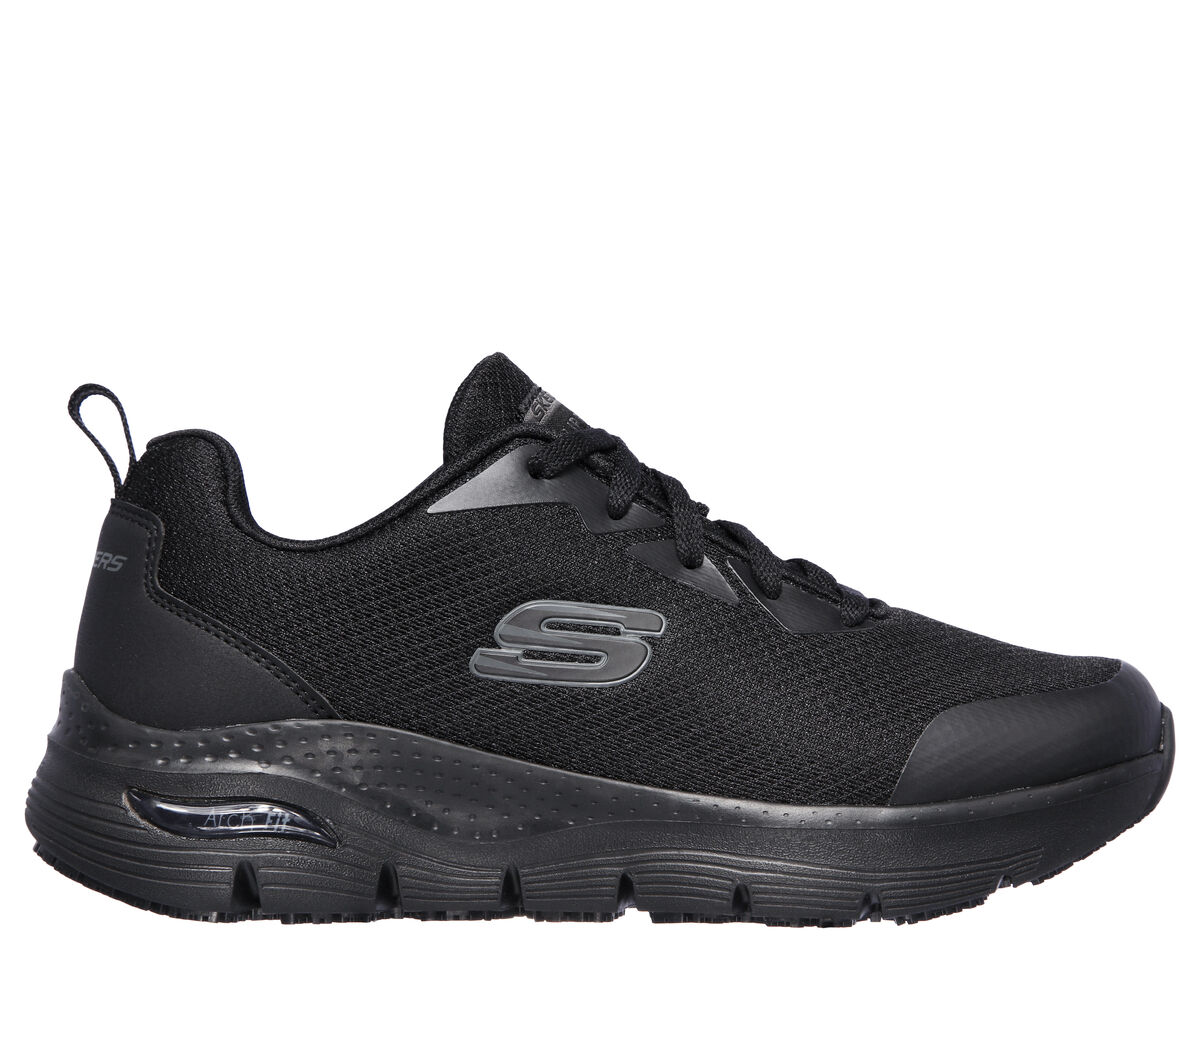 Skechers Grey Arch Fit Mesh Trainers